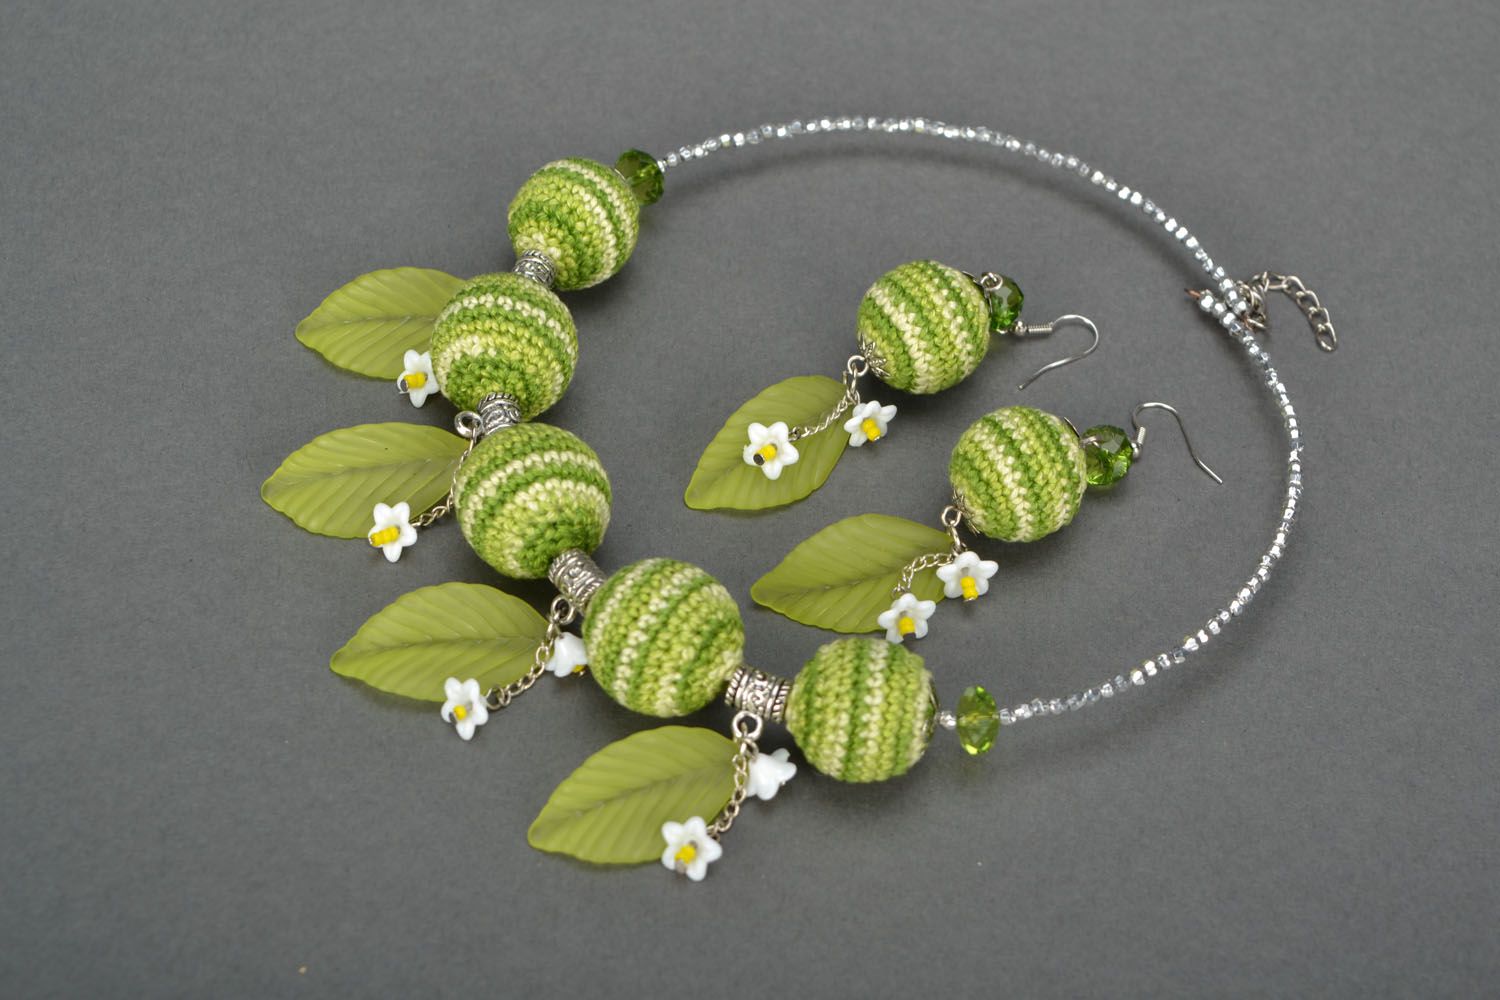 Green crochet necklace and earrings photo 1